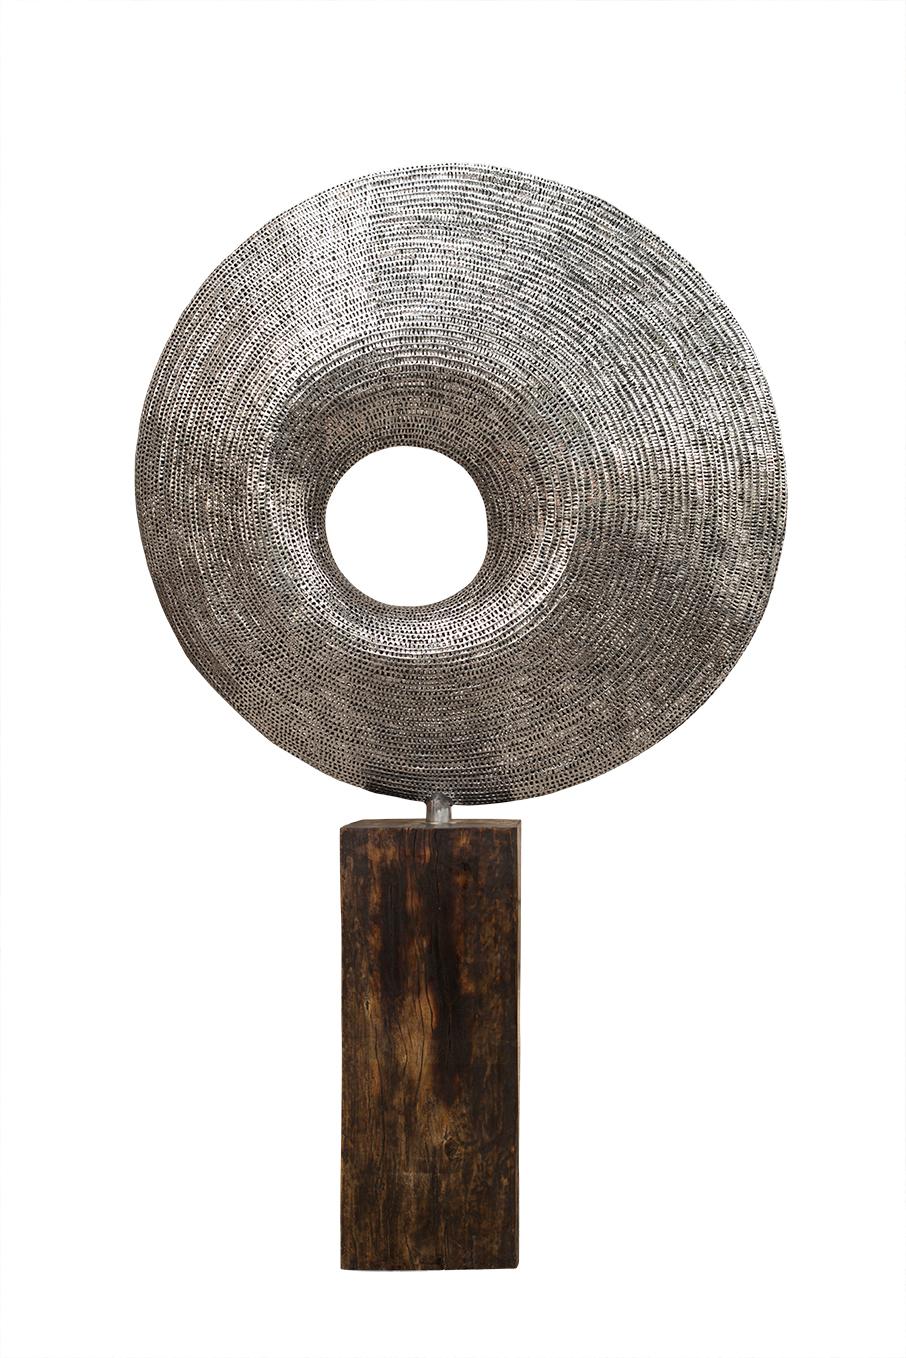 Stainless steel sculpture with wooden base.

Liechennay's works are inspired by nature and life, simply put, the forms and shapes he is surrounded by. He creates highly aesthetic pieces embodying artistic balance and beauty that transmit a sense of